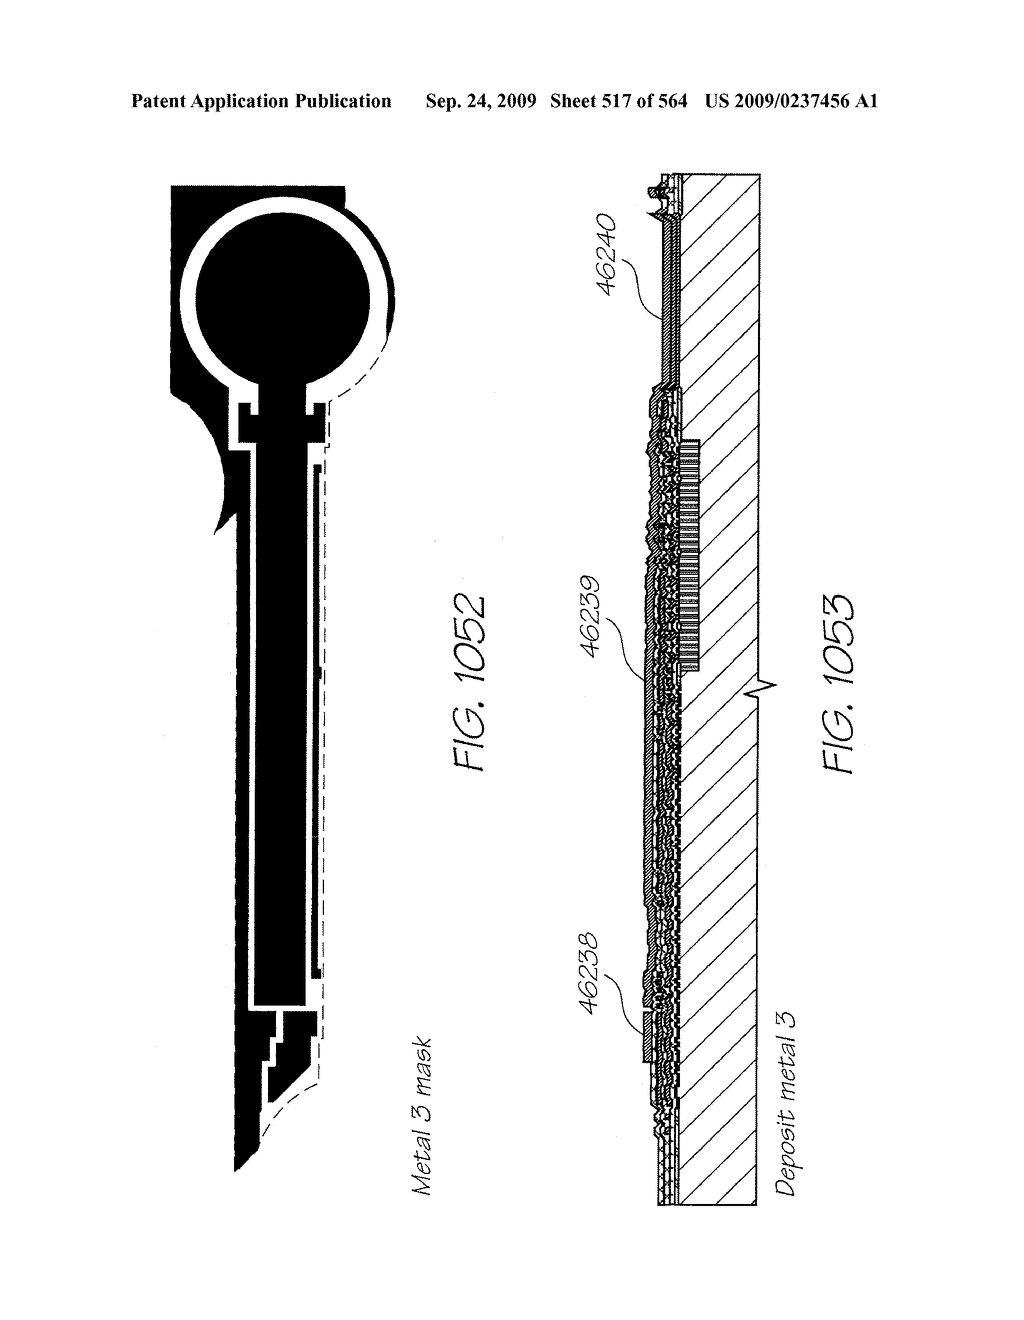 Inkjet Printhead With Paddle For Ejecting Ink From One Of Two Nozzles - diagram, schematic, and image 518